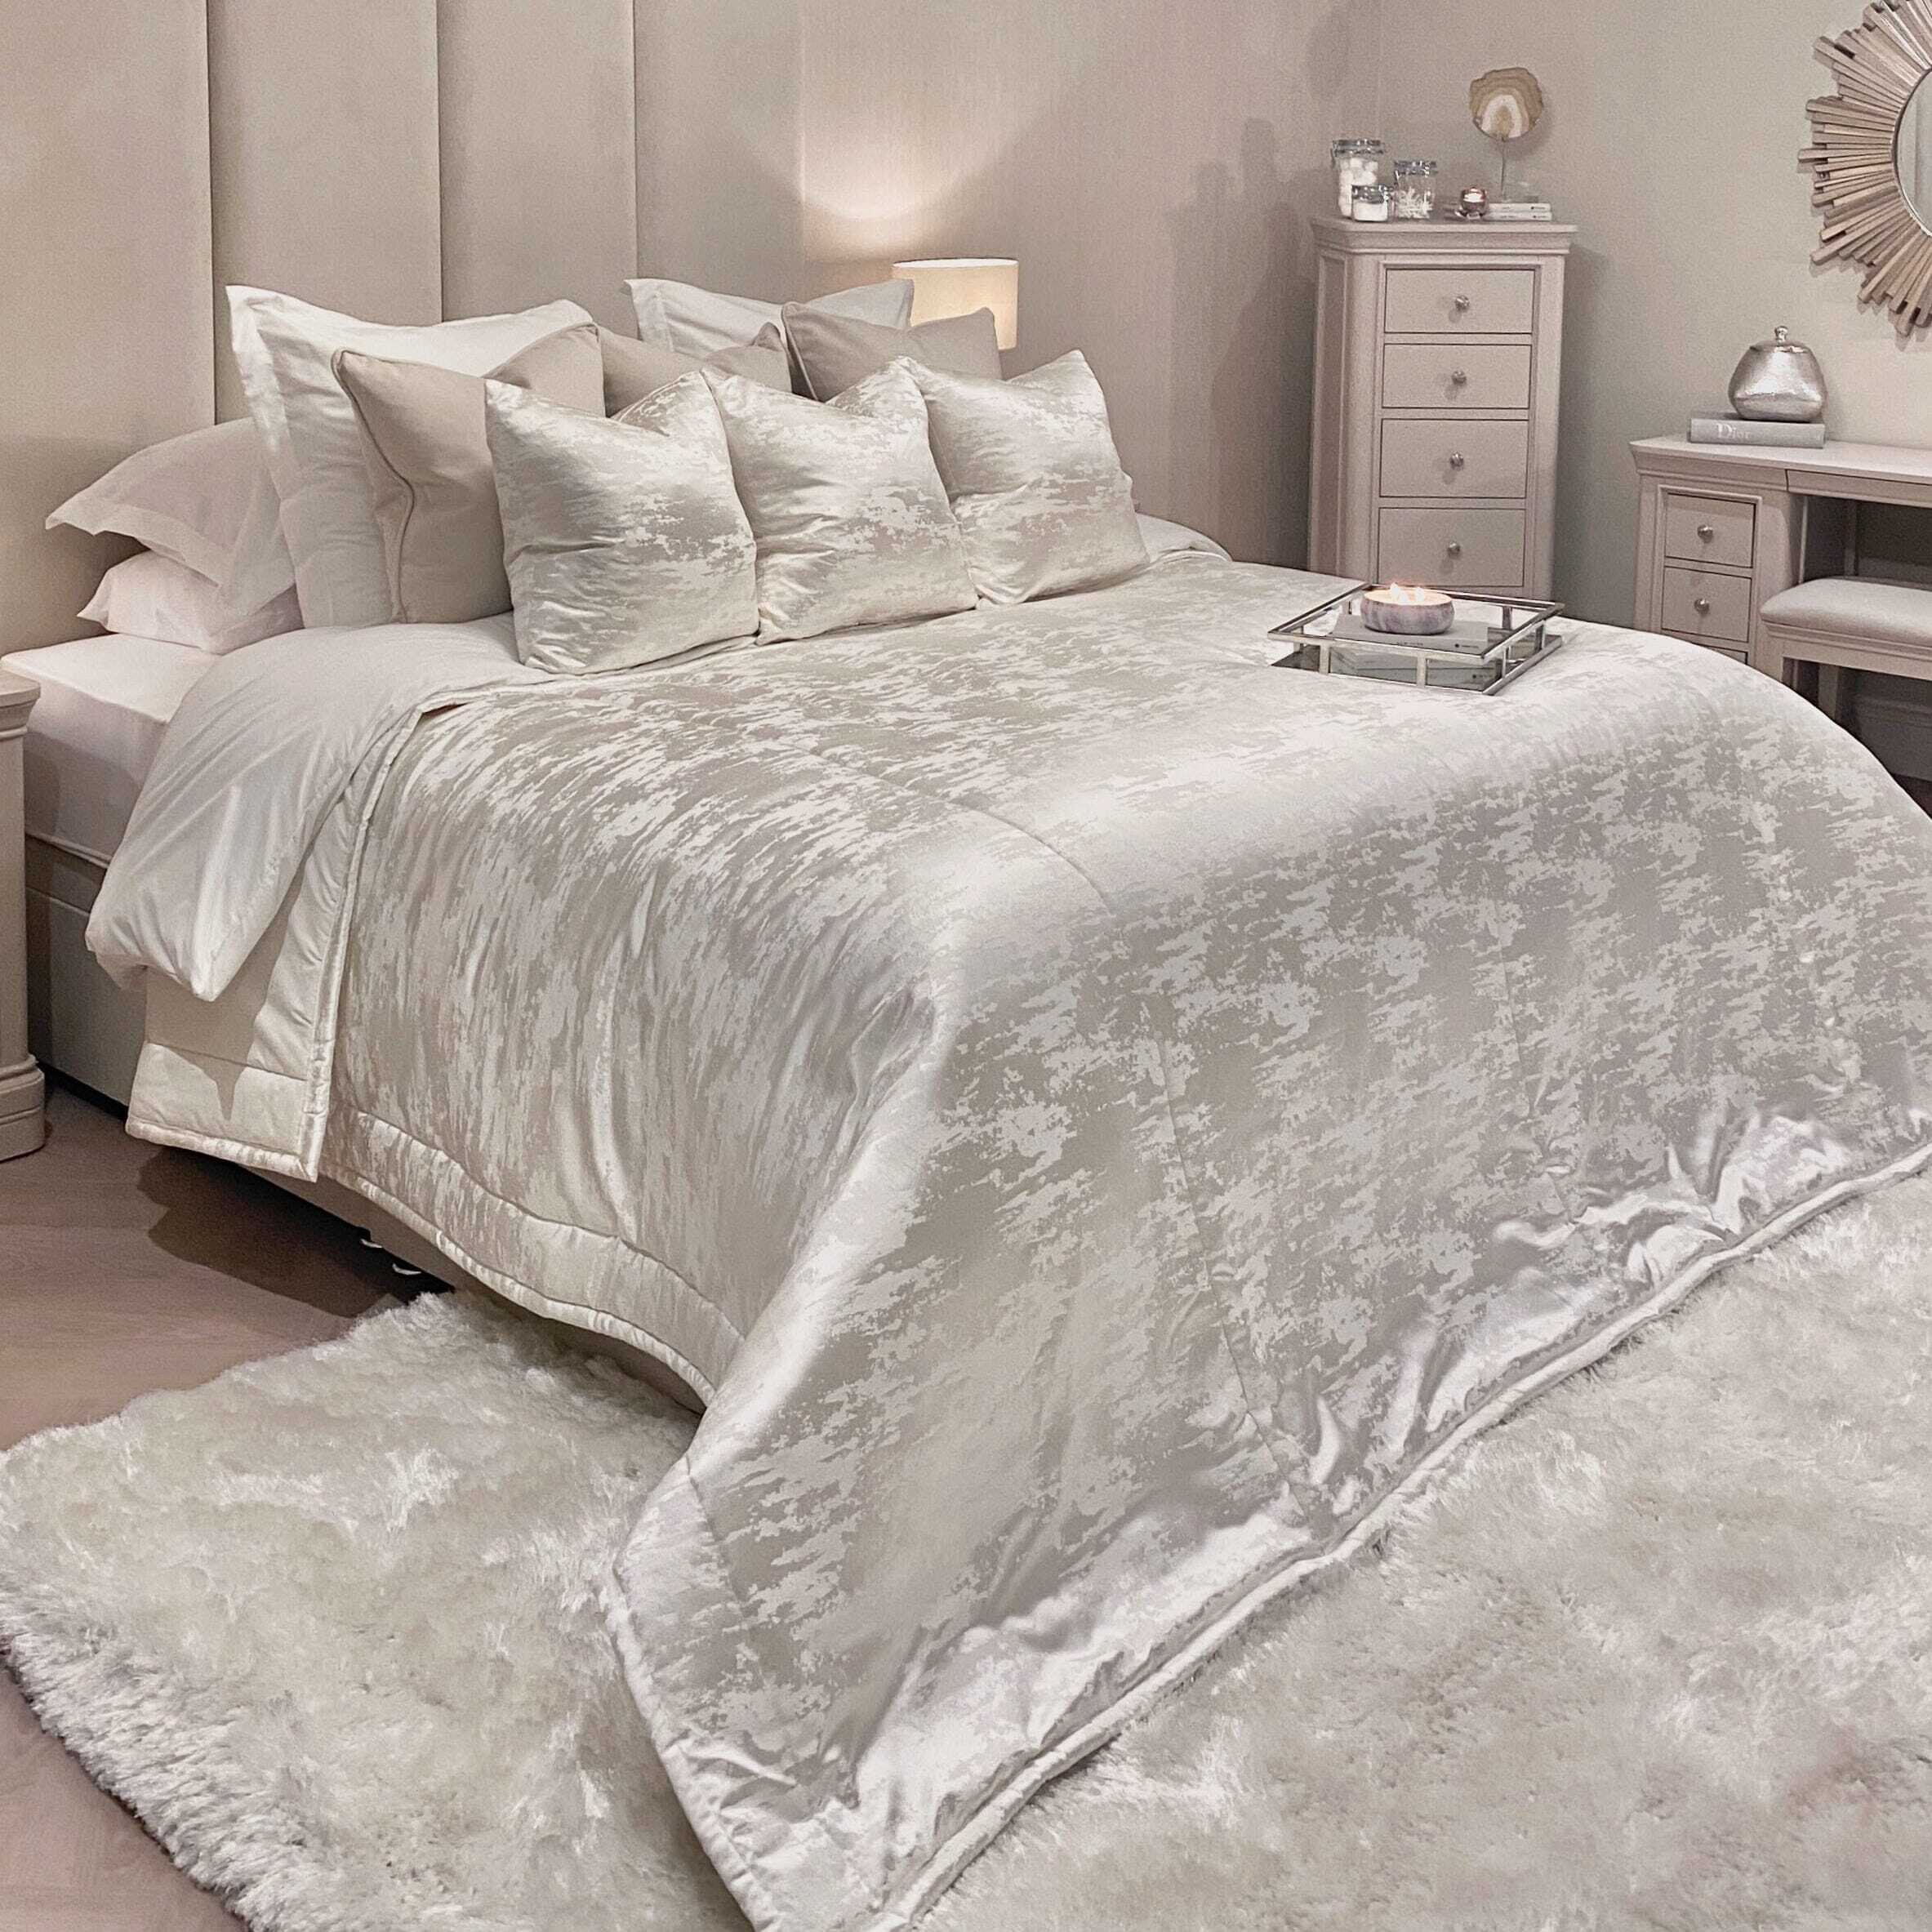 Hailes Pearl Satin Mix Marble Effect Bedspread, Double